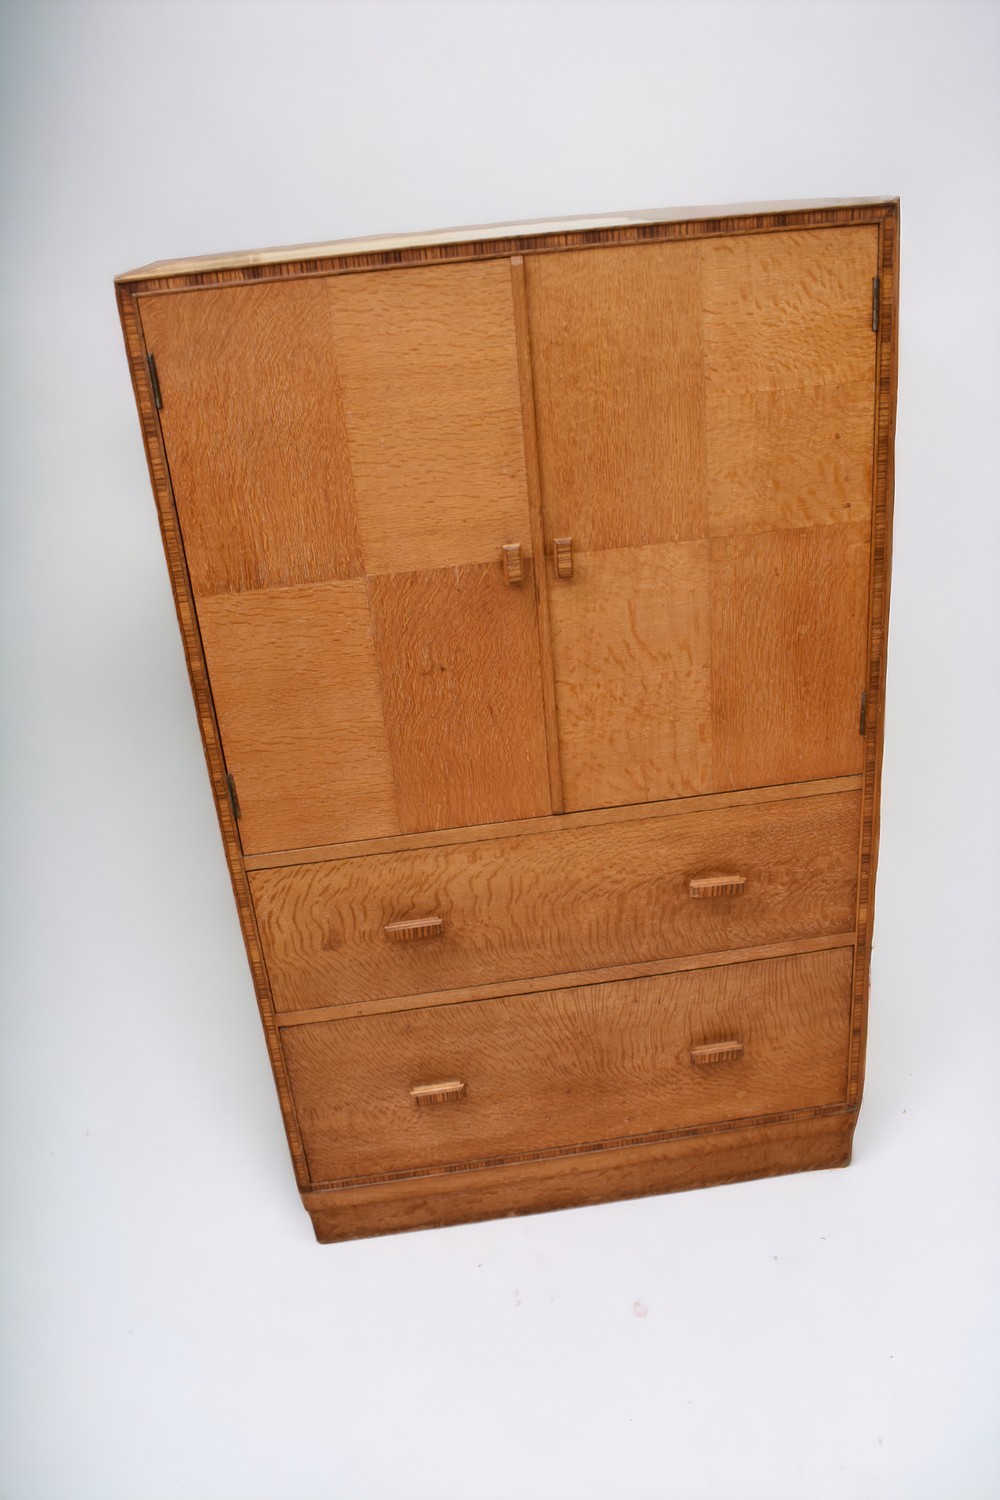 A Heal's cabinet of two cupboards above two drawers, with patchwork design and banded detail